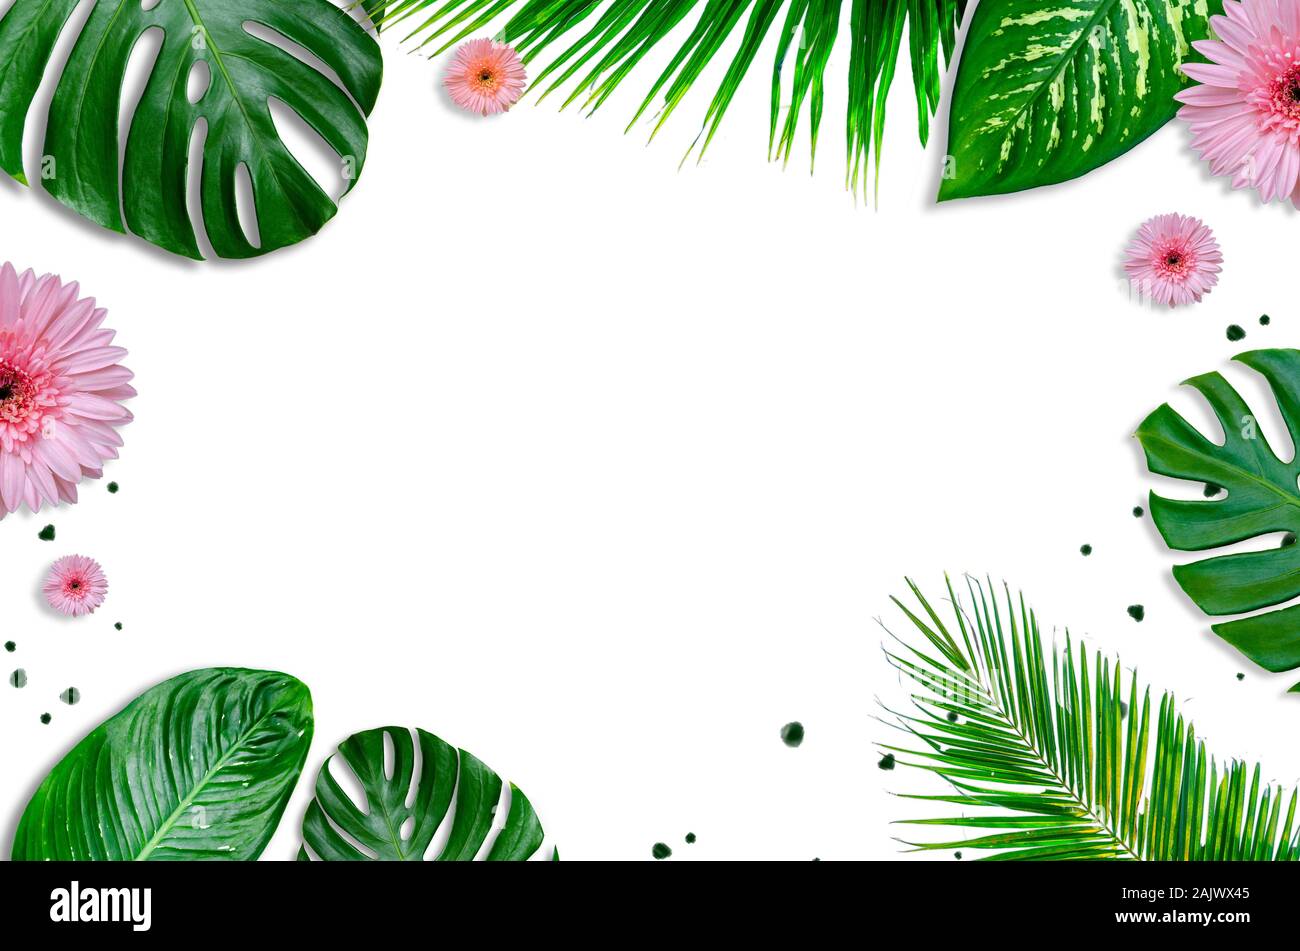 leaves background white with green leaves and flowers flatlay Stock Photo